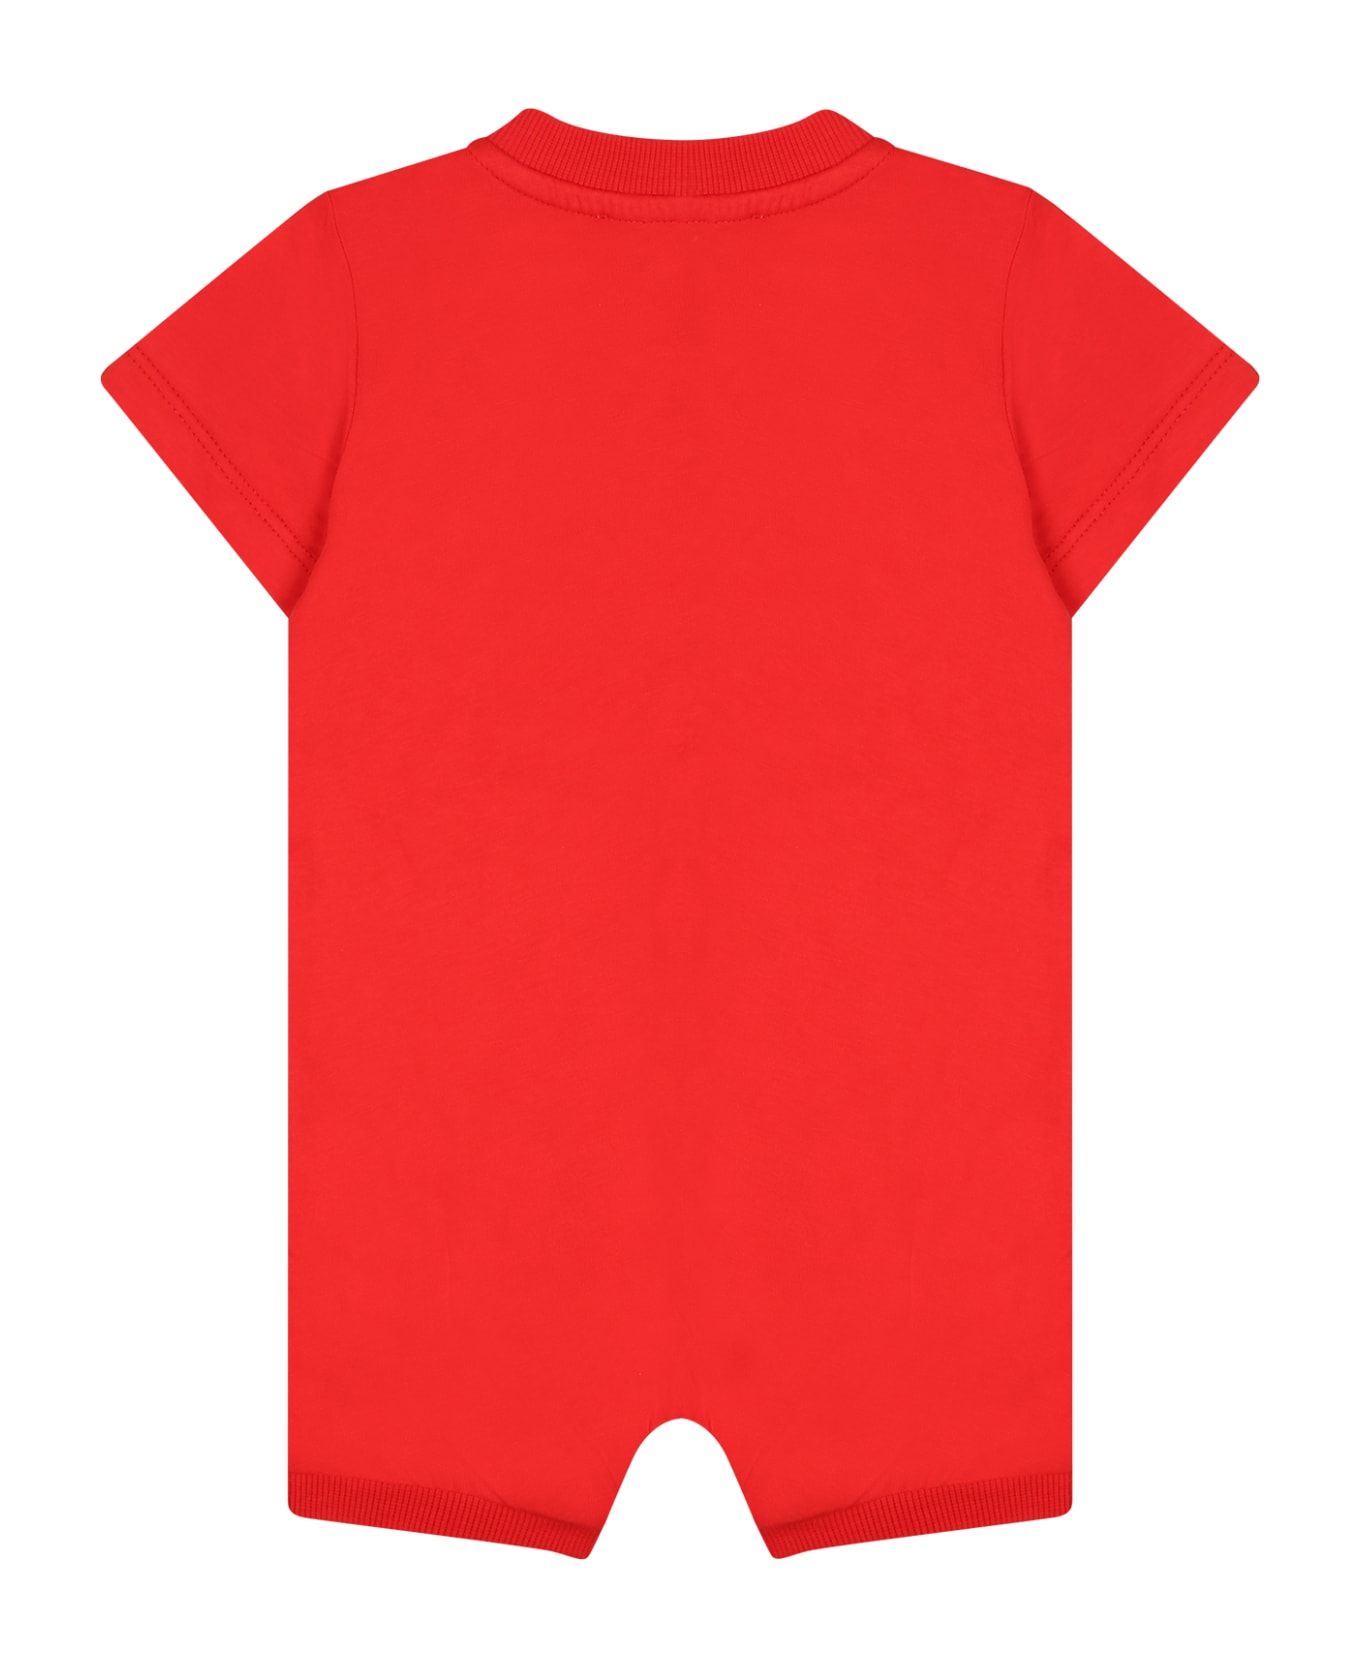 Moschino Red Romper For Baby Kids With Teddy Bear - Red